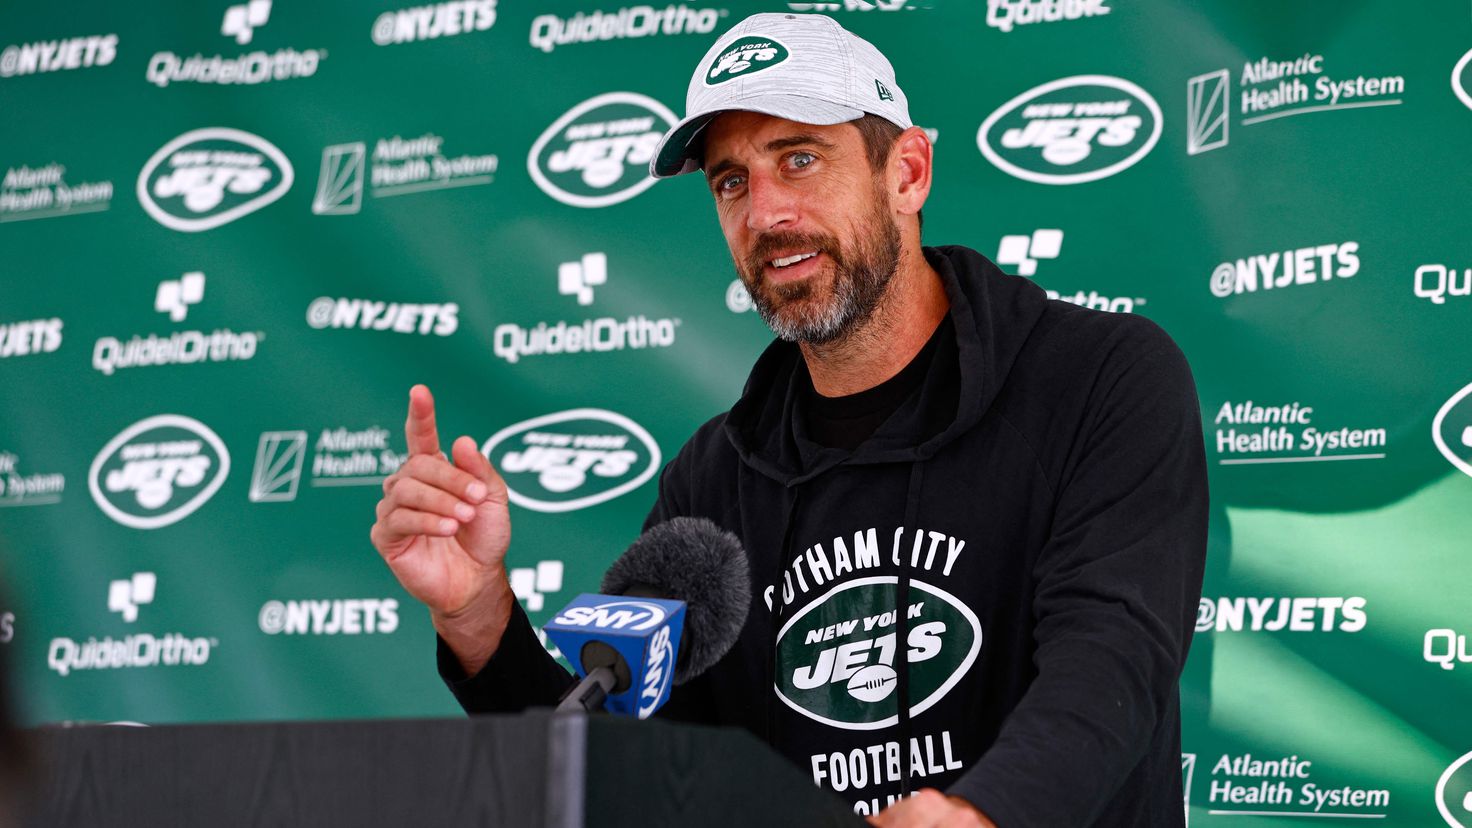 Aaron Rodgers modifies his contract with the New York Jets
